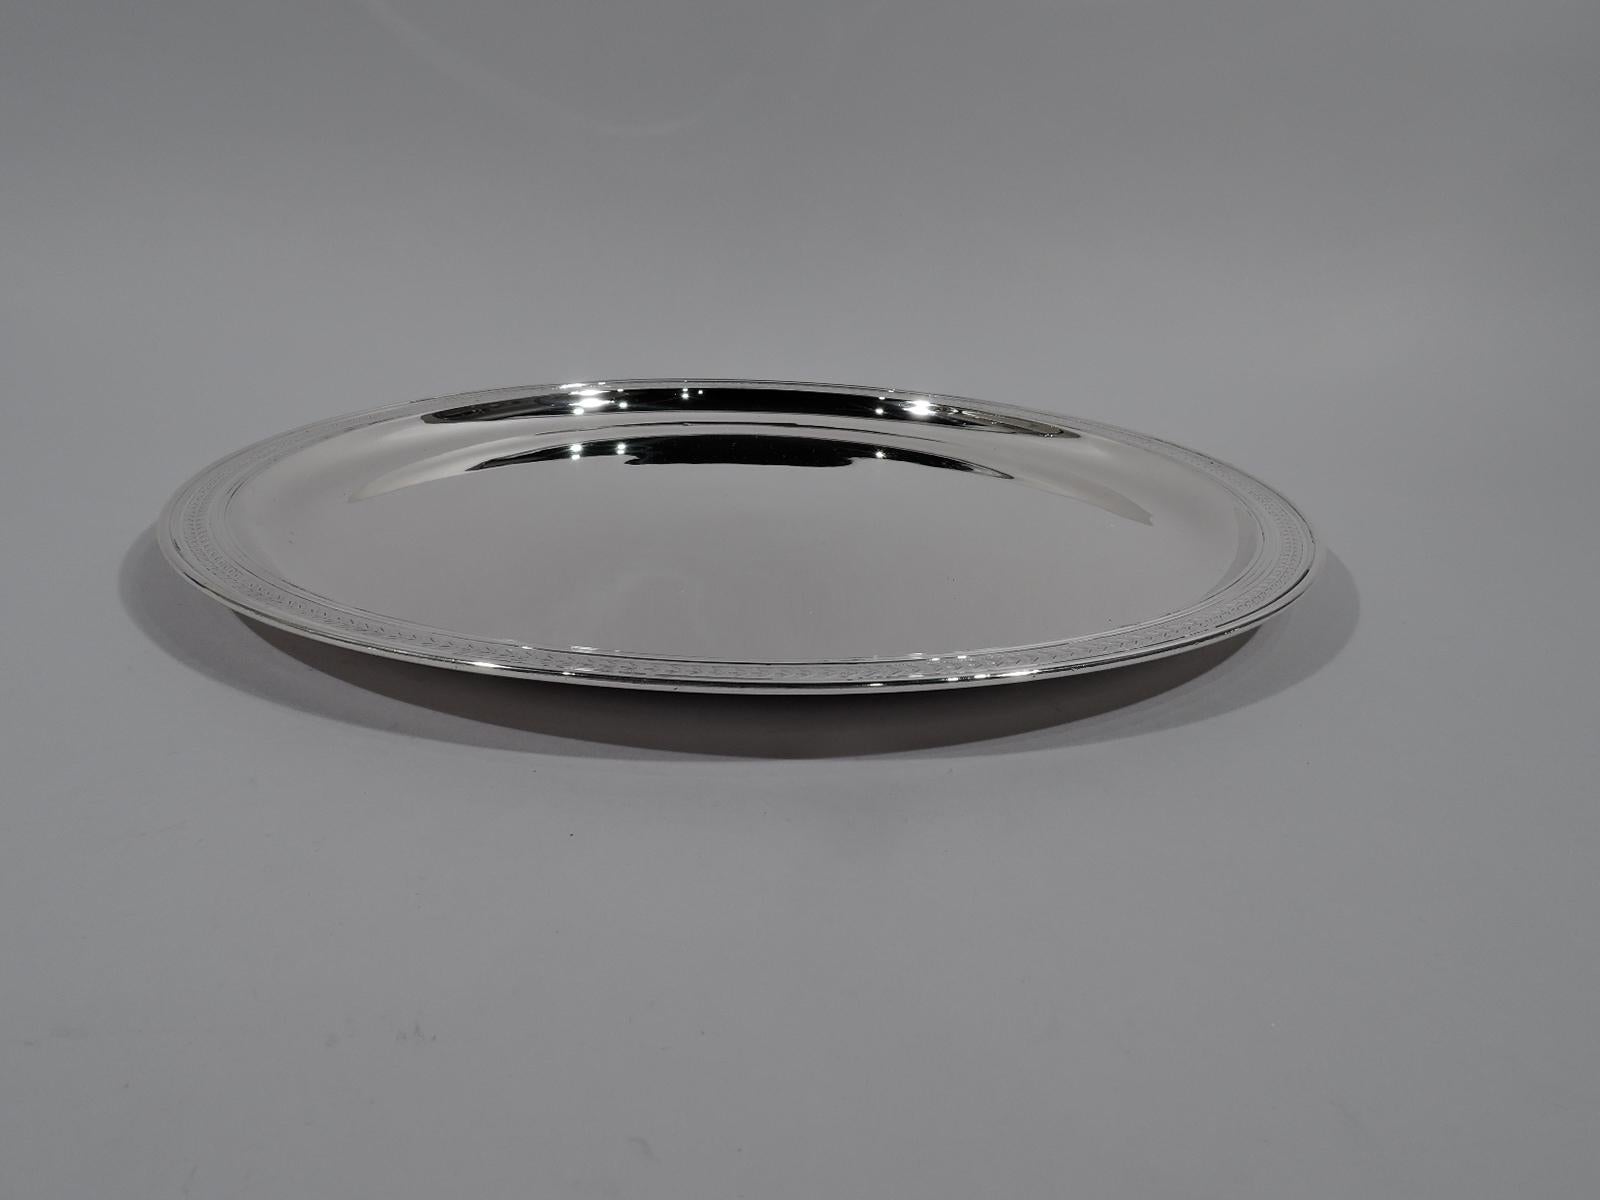 Art Deco sterling silver tray. Made by Tiffany & Co. in New York, circa 1912. Round well with curved sides, flat shoulder acid-etched with stylized chevron leaf band, and molded rim. Fully marked including pattern no. 18316 (first produced in 1912)